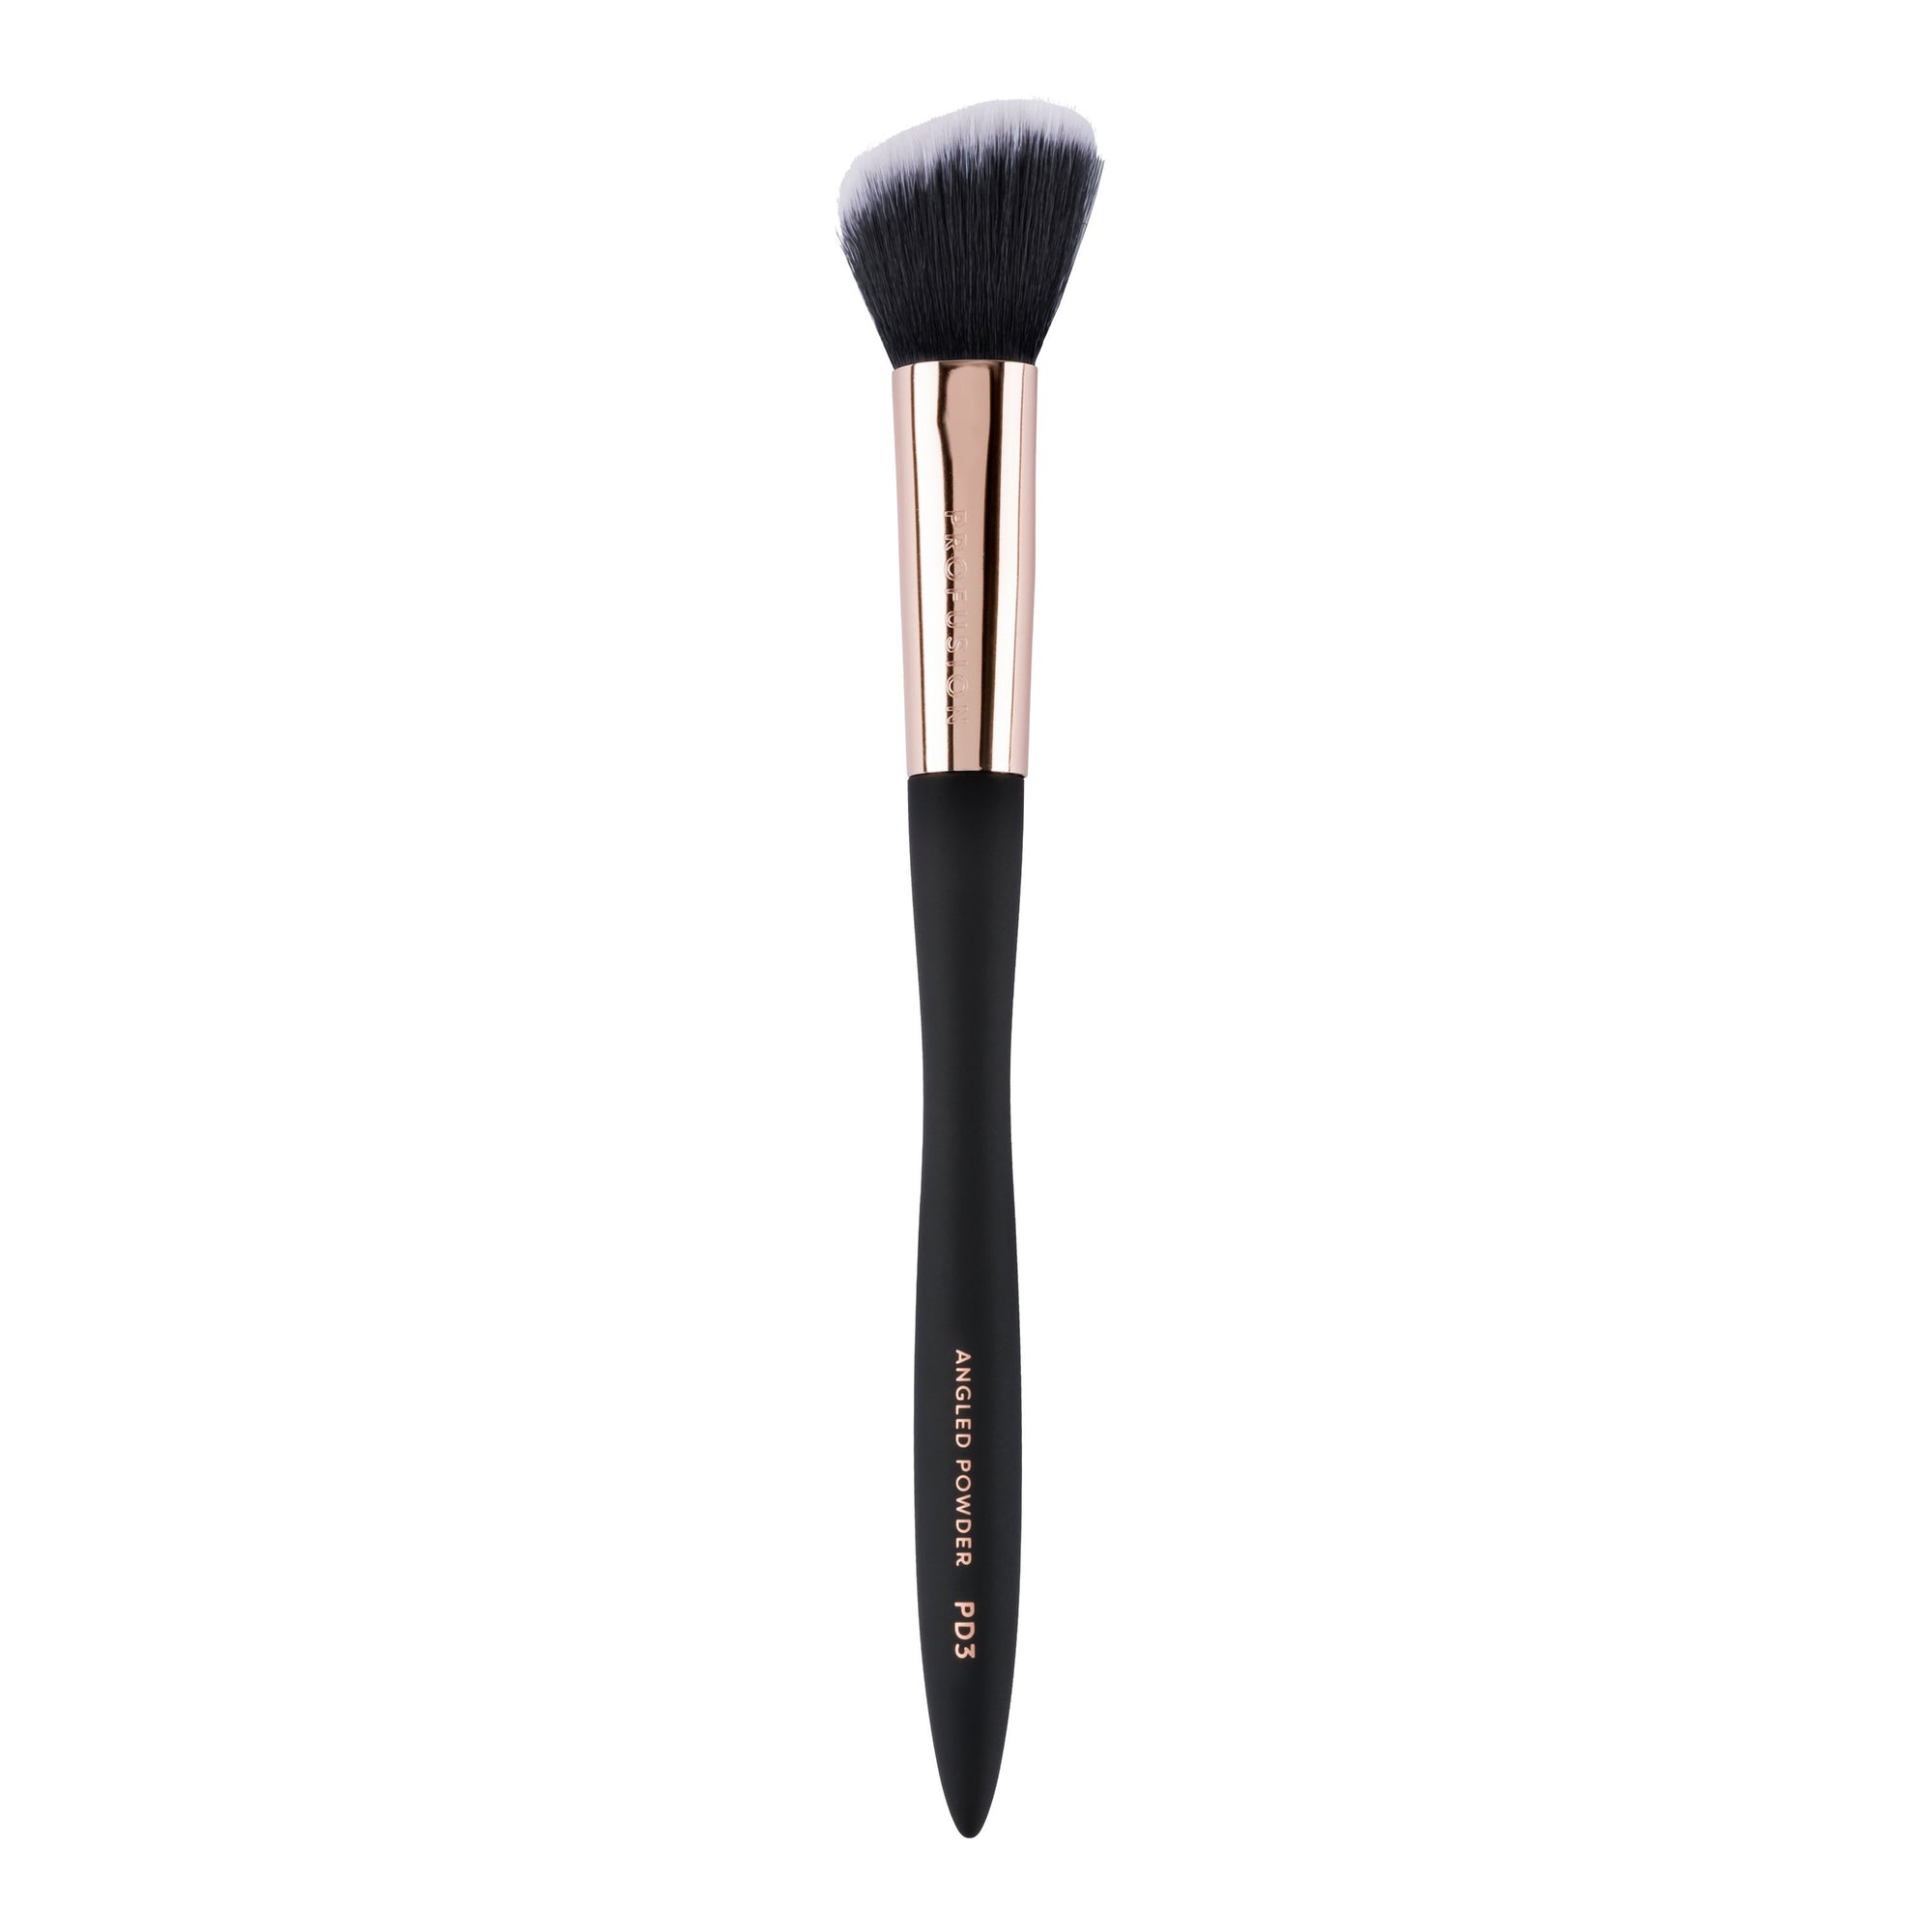 Beautify 10 White Color Makeup Brushes For Girls at Rs 352.00, Makeup  Brush